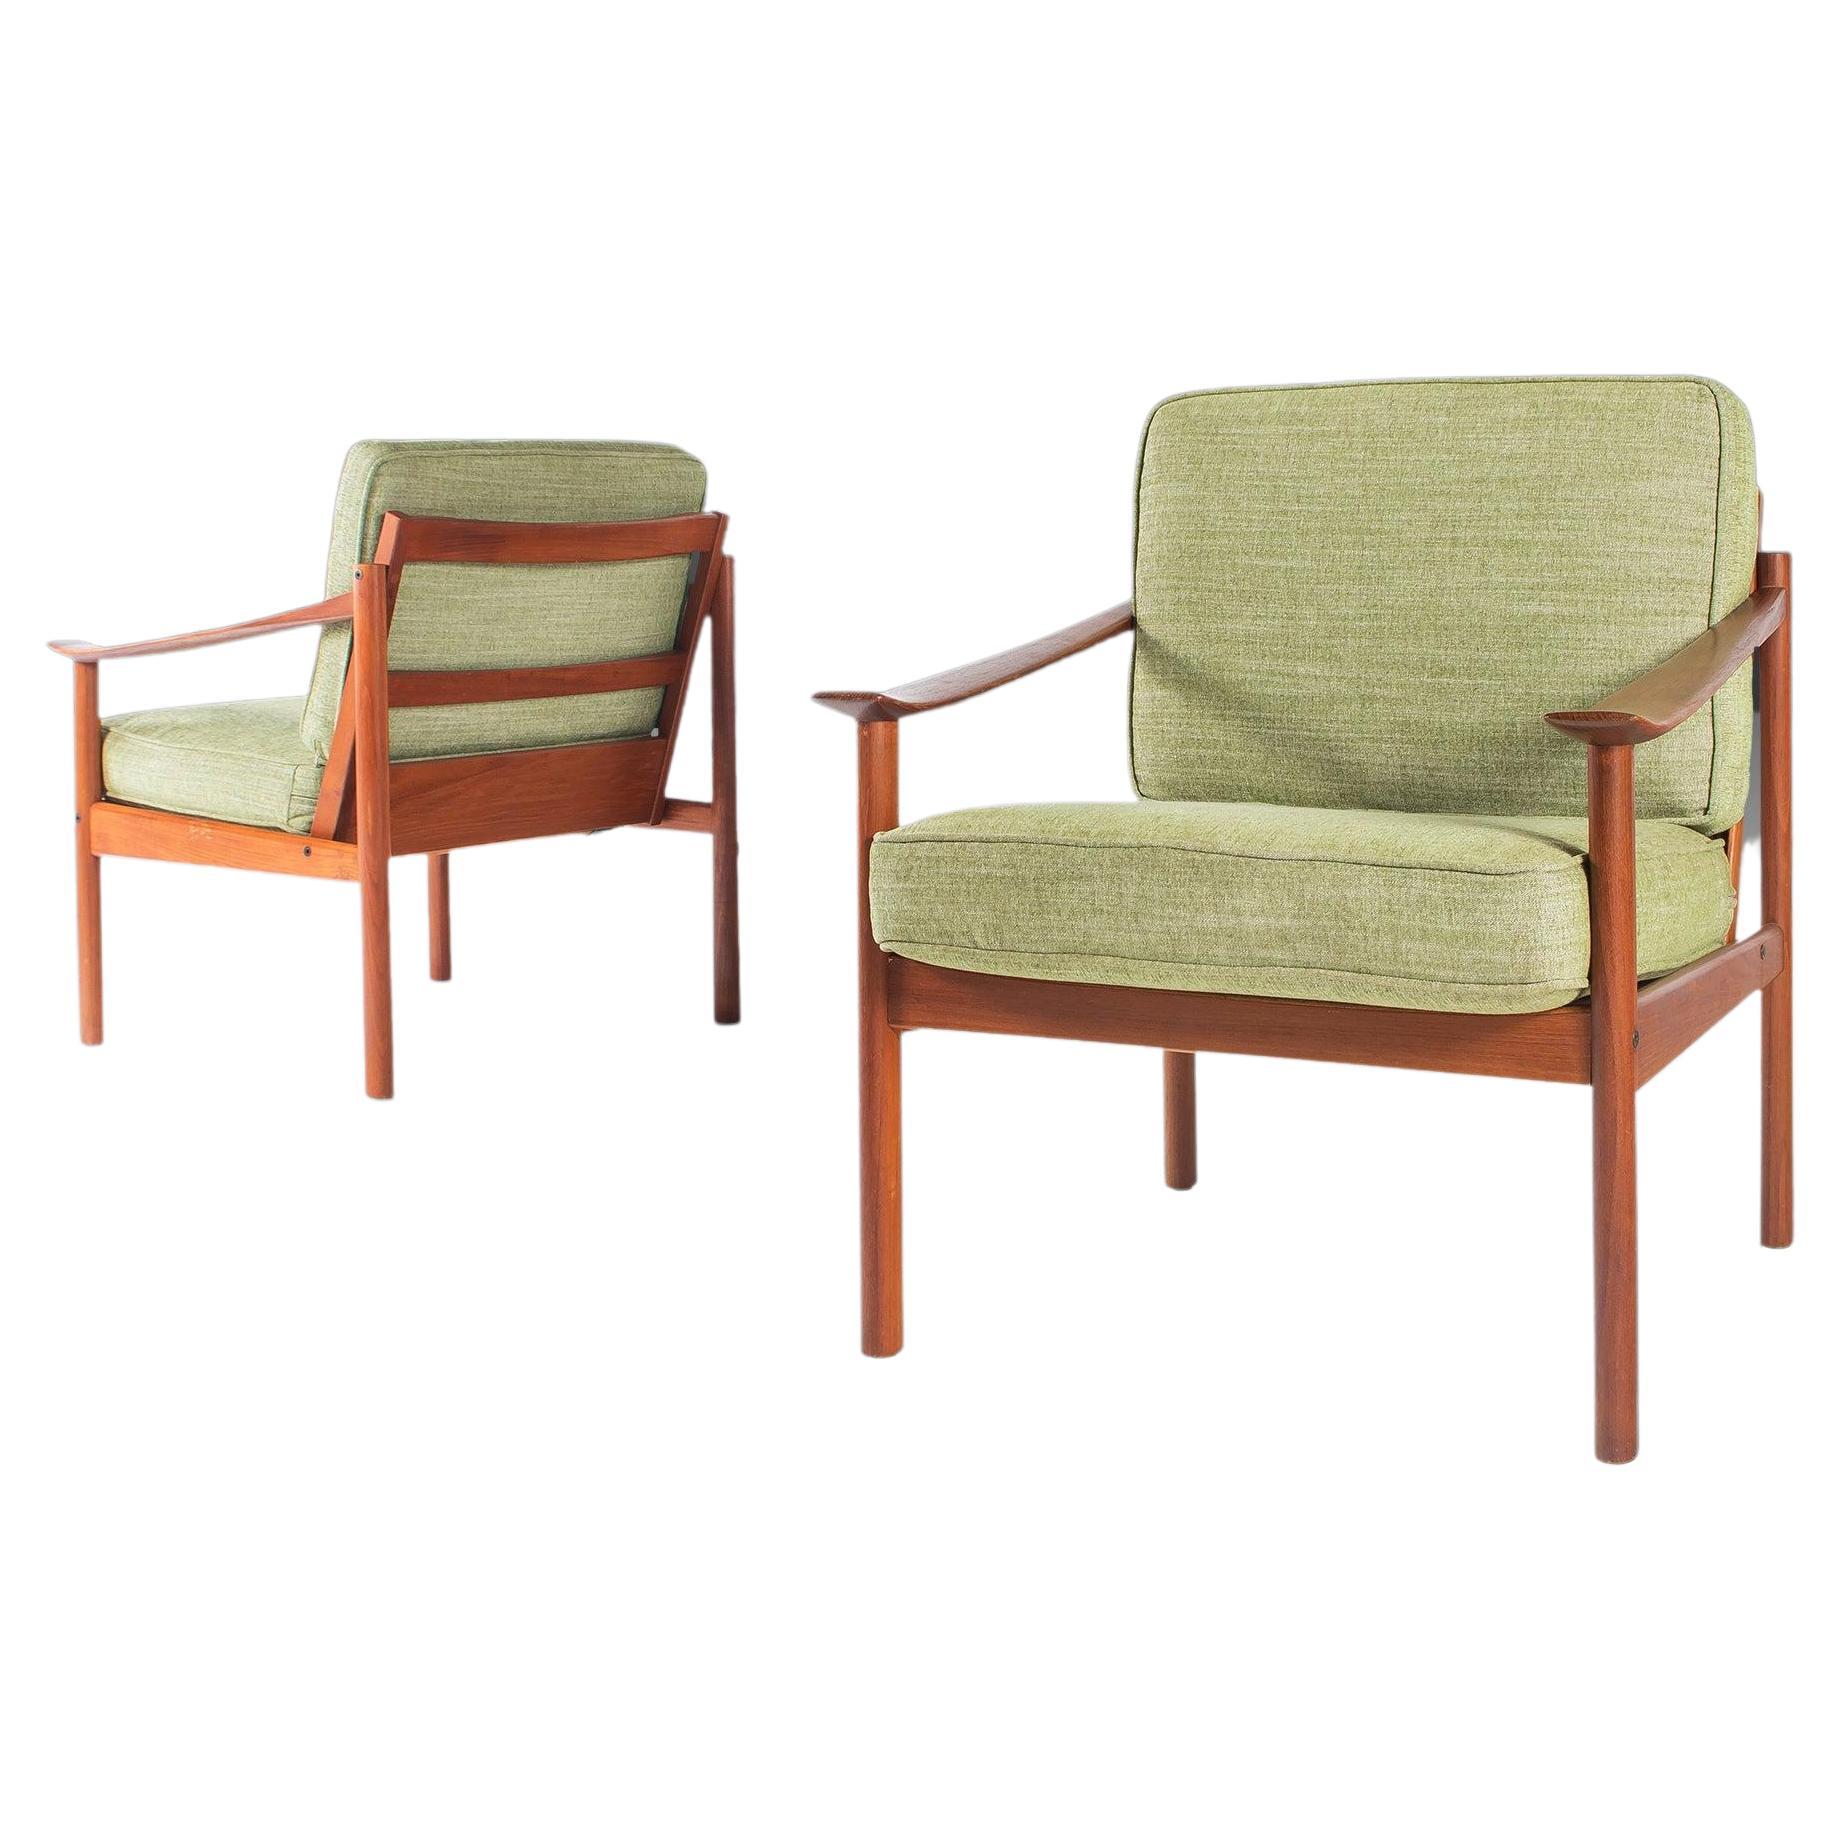 Set of Two '2' Lounge Chairs by Peter Hvidt for Soborg Møbler, Denmark, c. 1960s For Sale